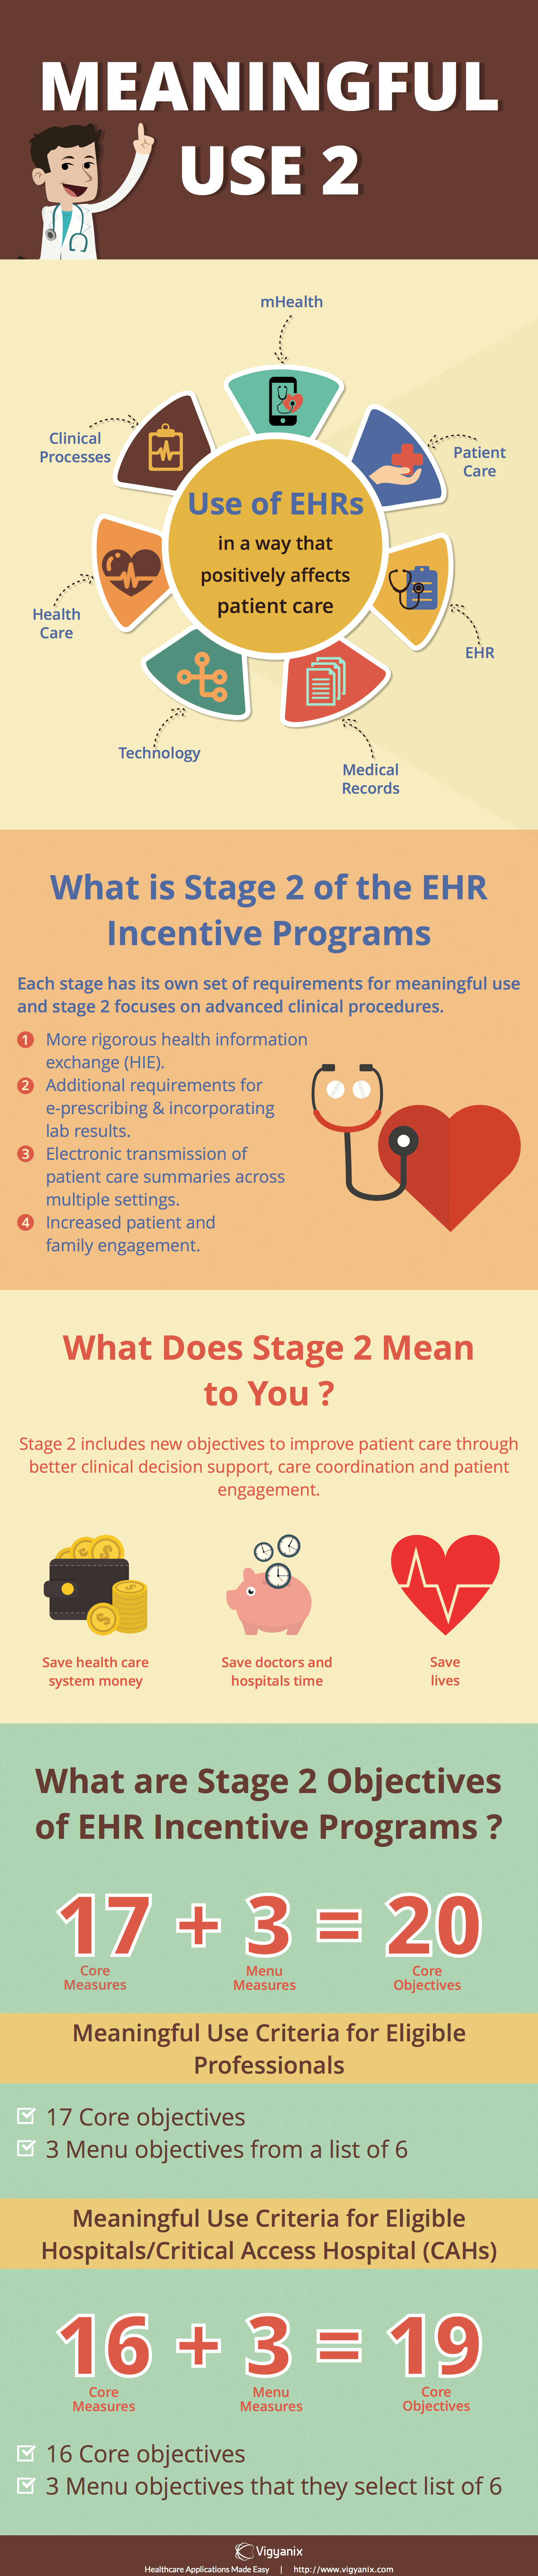 What You Need to Know About Meaningful Use Stage 2